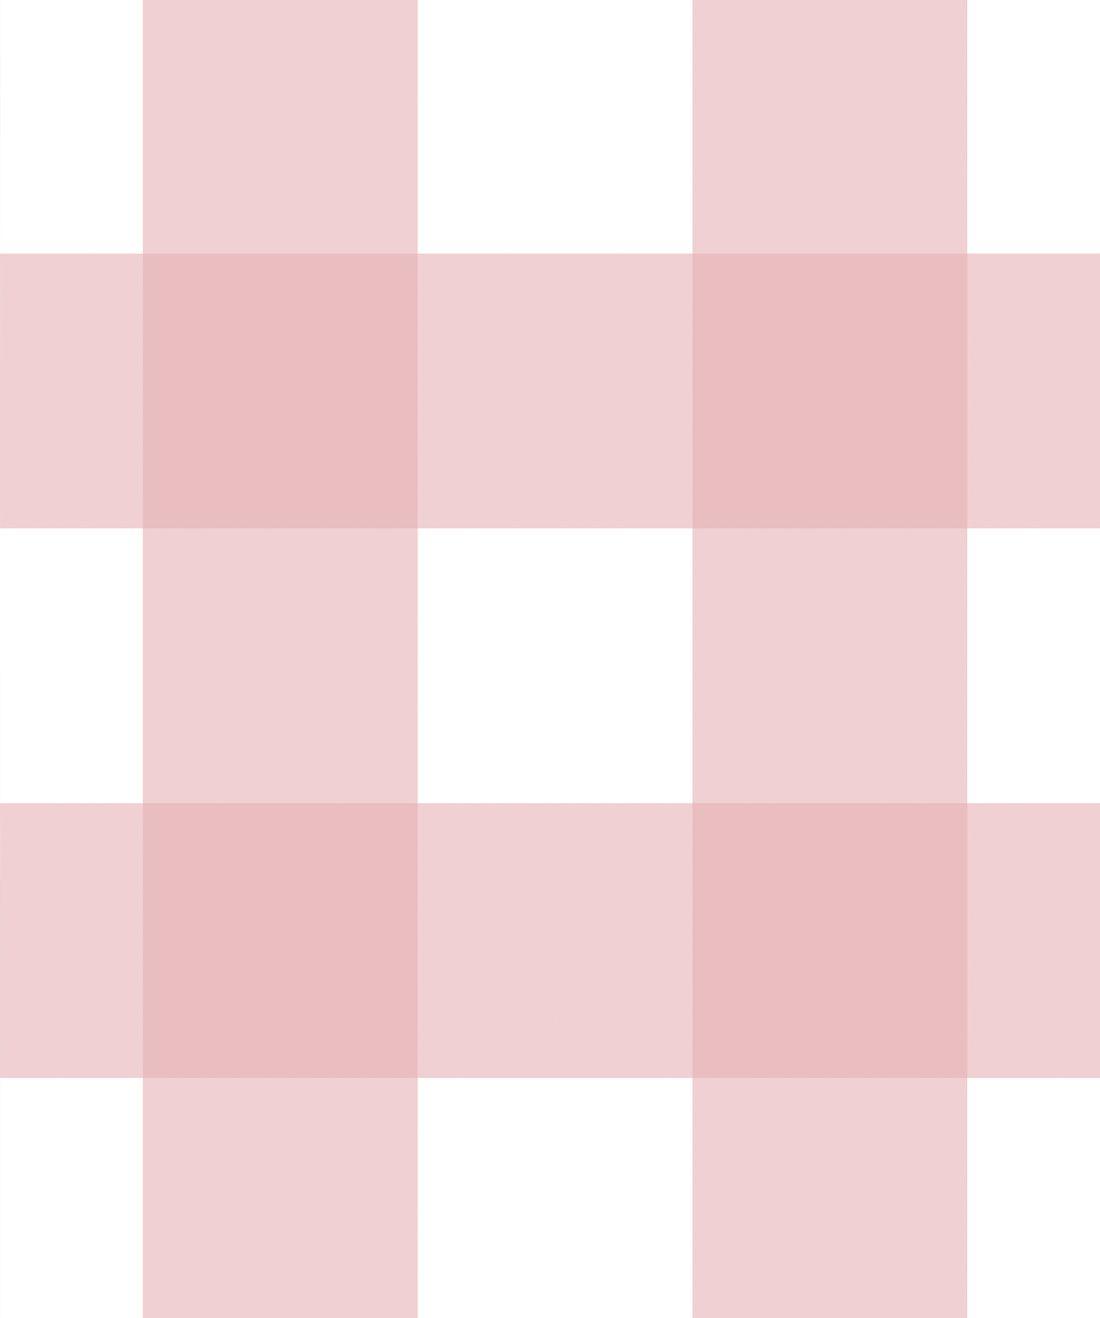 Light Pink Simple Wallpapers - Top Free Light Pink Simple Backgrounds ...